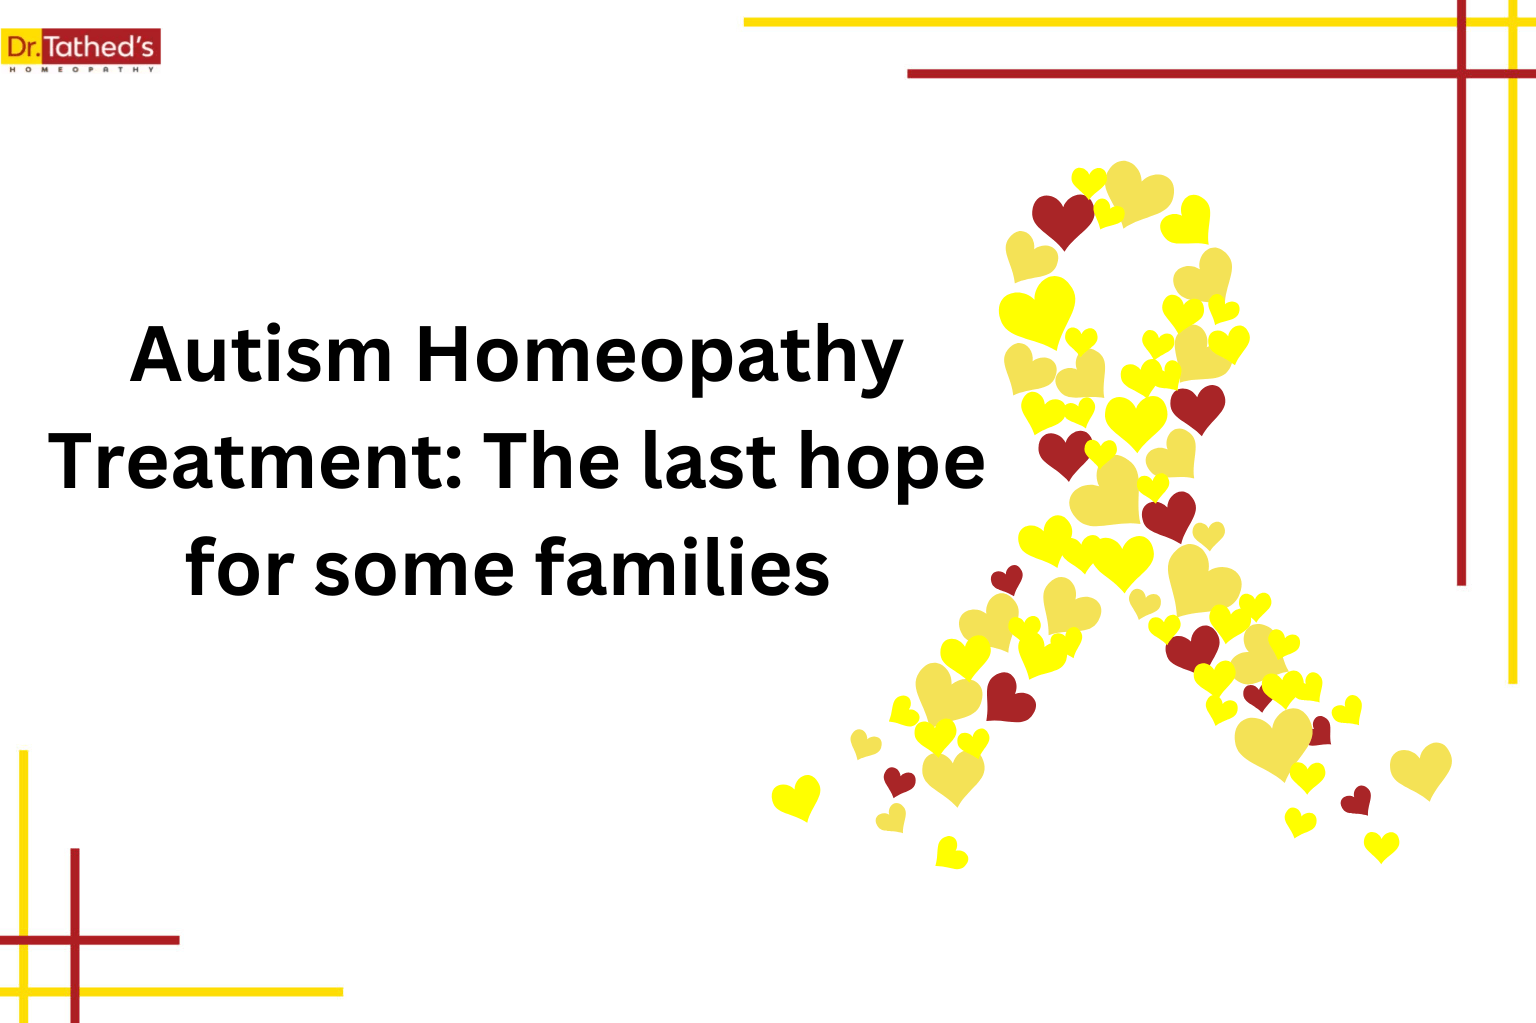 Autism Homeopathy Treatment: The last hope for some families